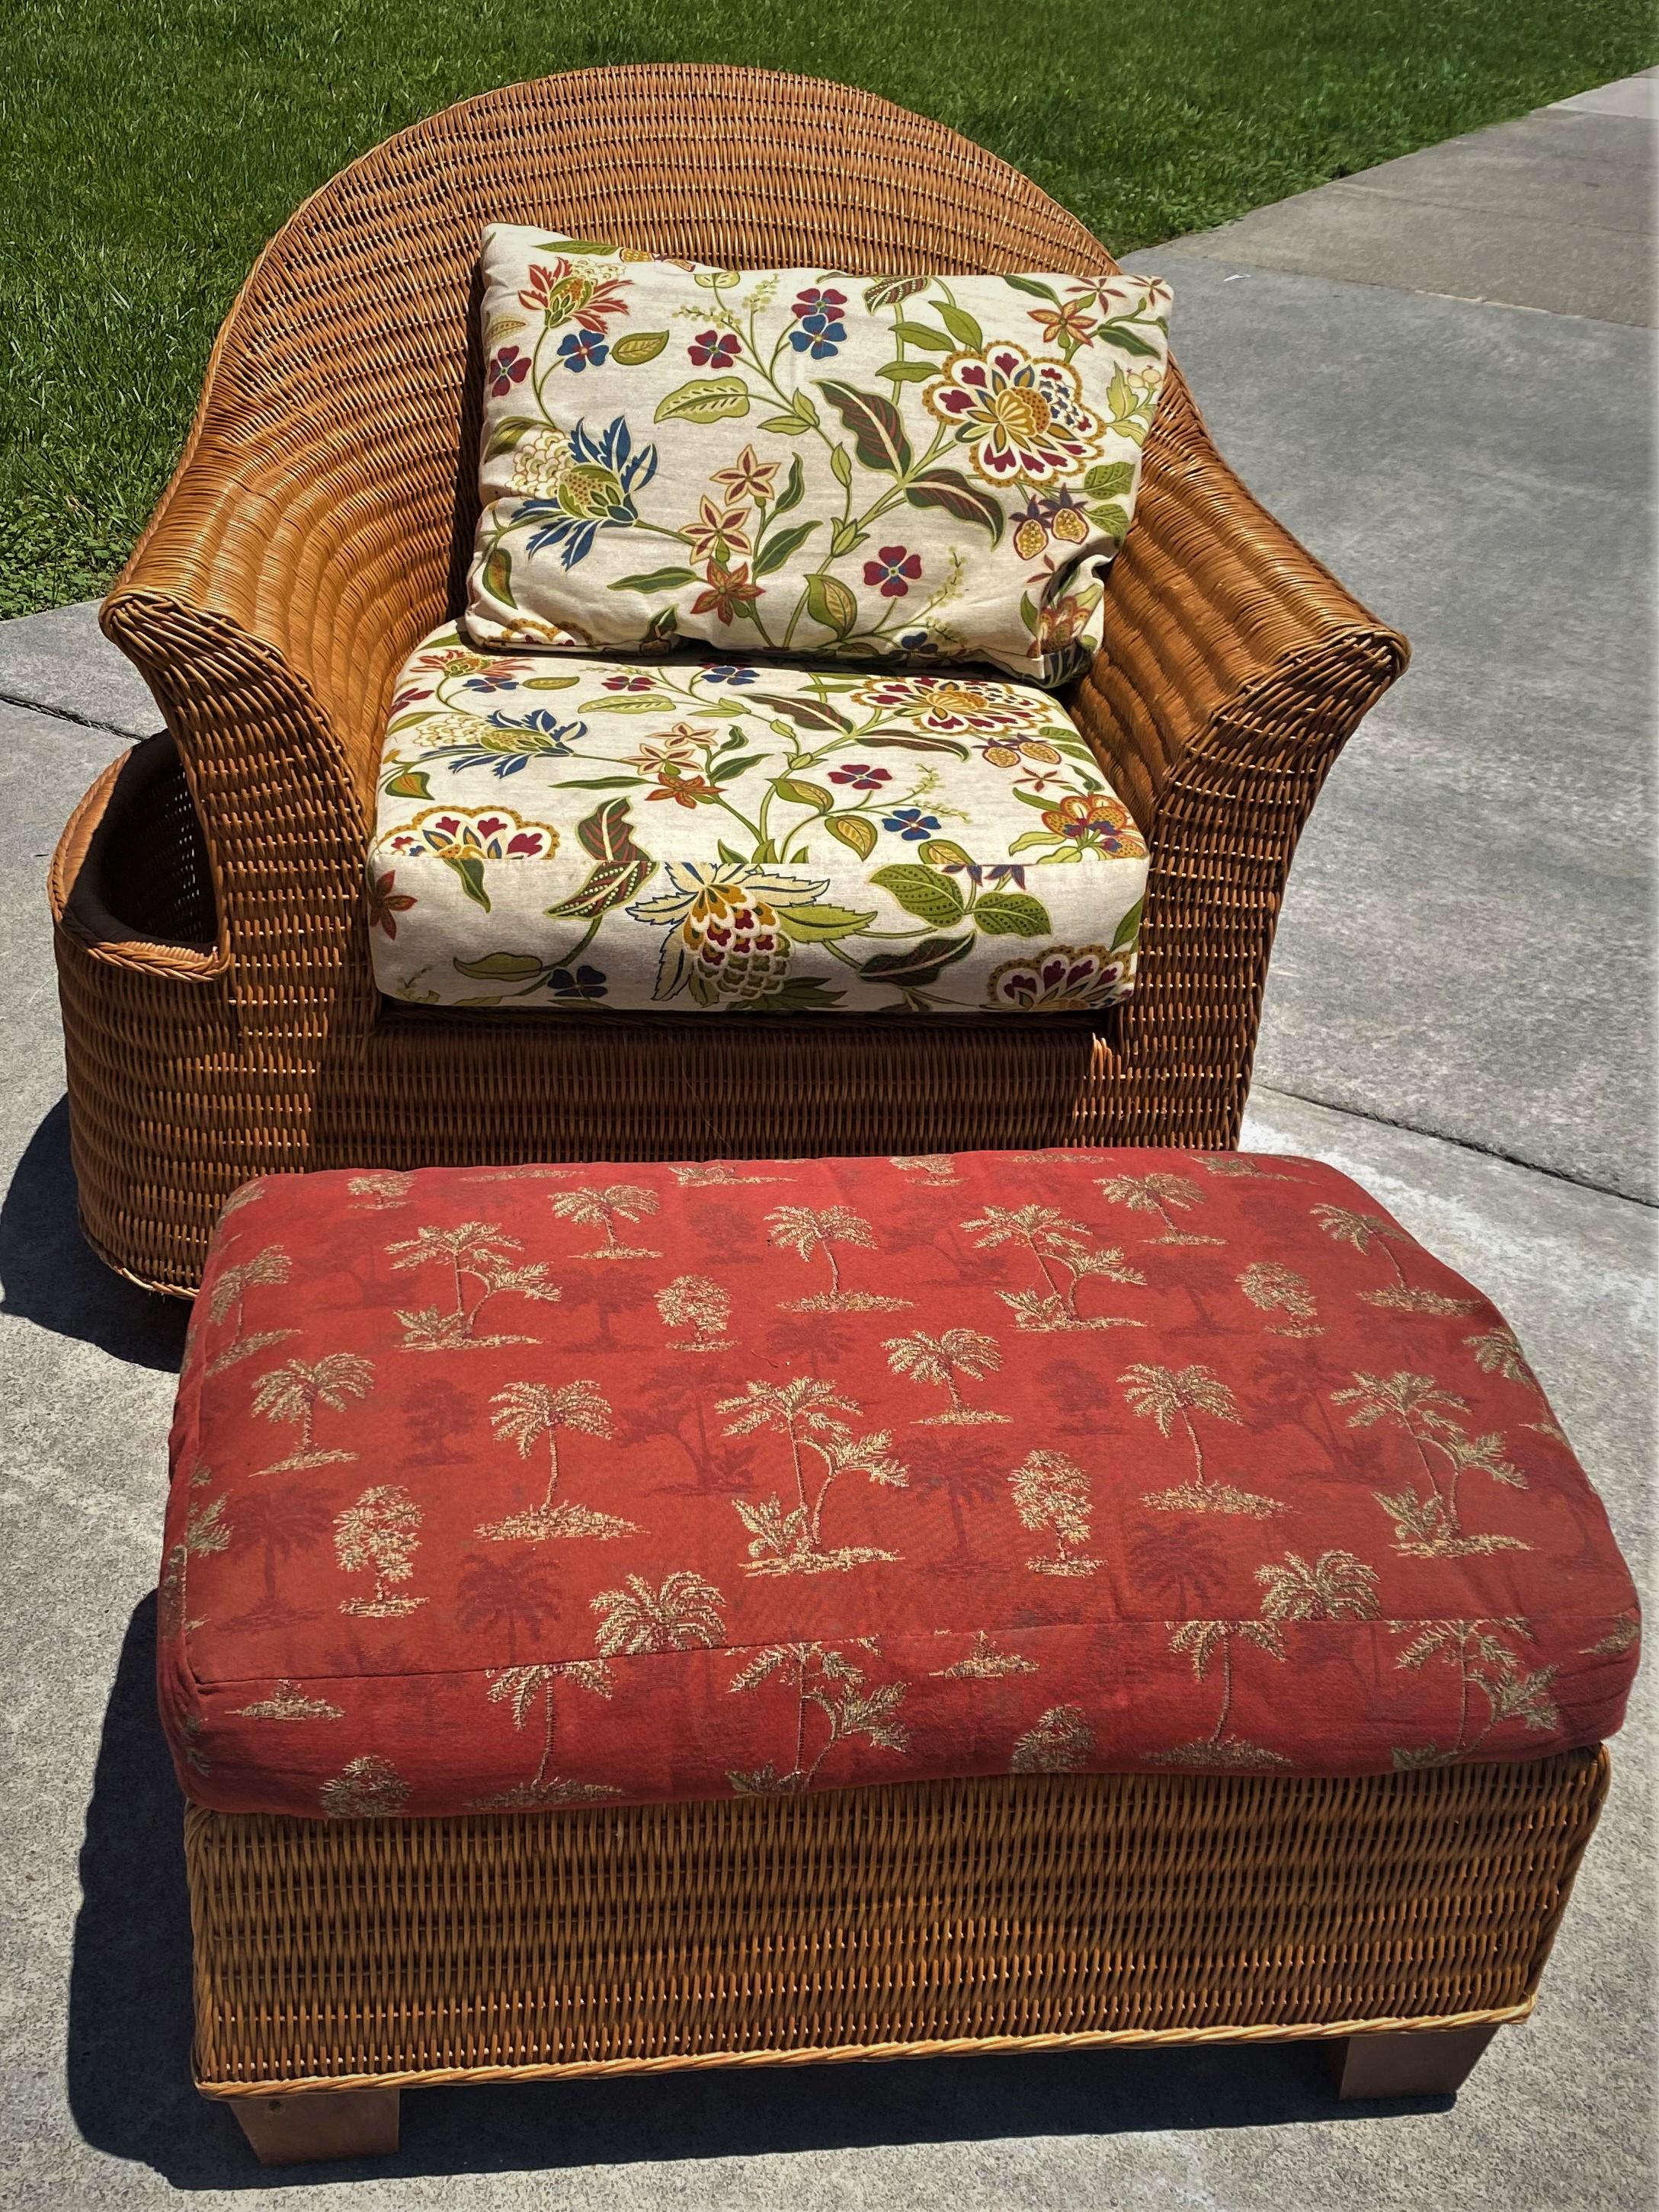 Wonderful modern wicker chair with a magazine holder connected to the side and decorative white background floral upholstery. The ottoman matches the chair except the upholstery. This chair is in good condition it has a tag from M.C, Interiors &